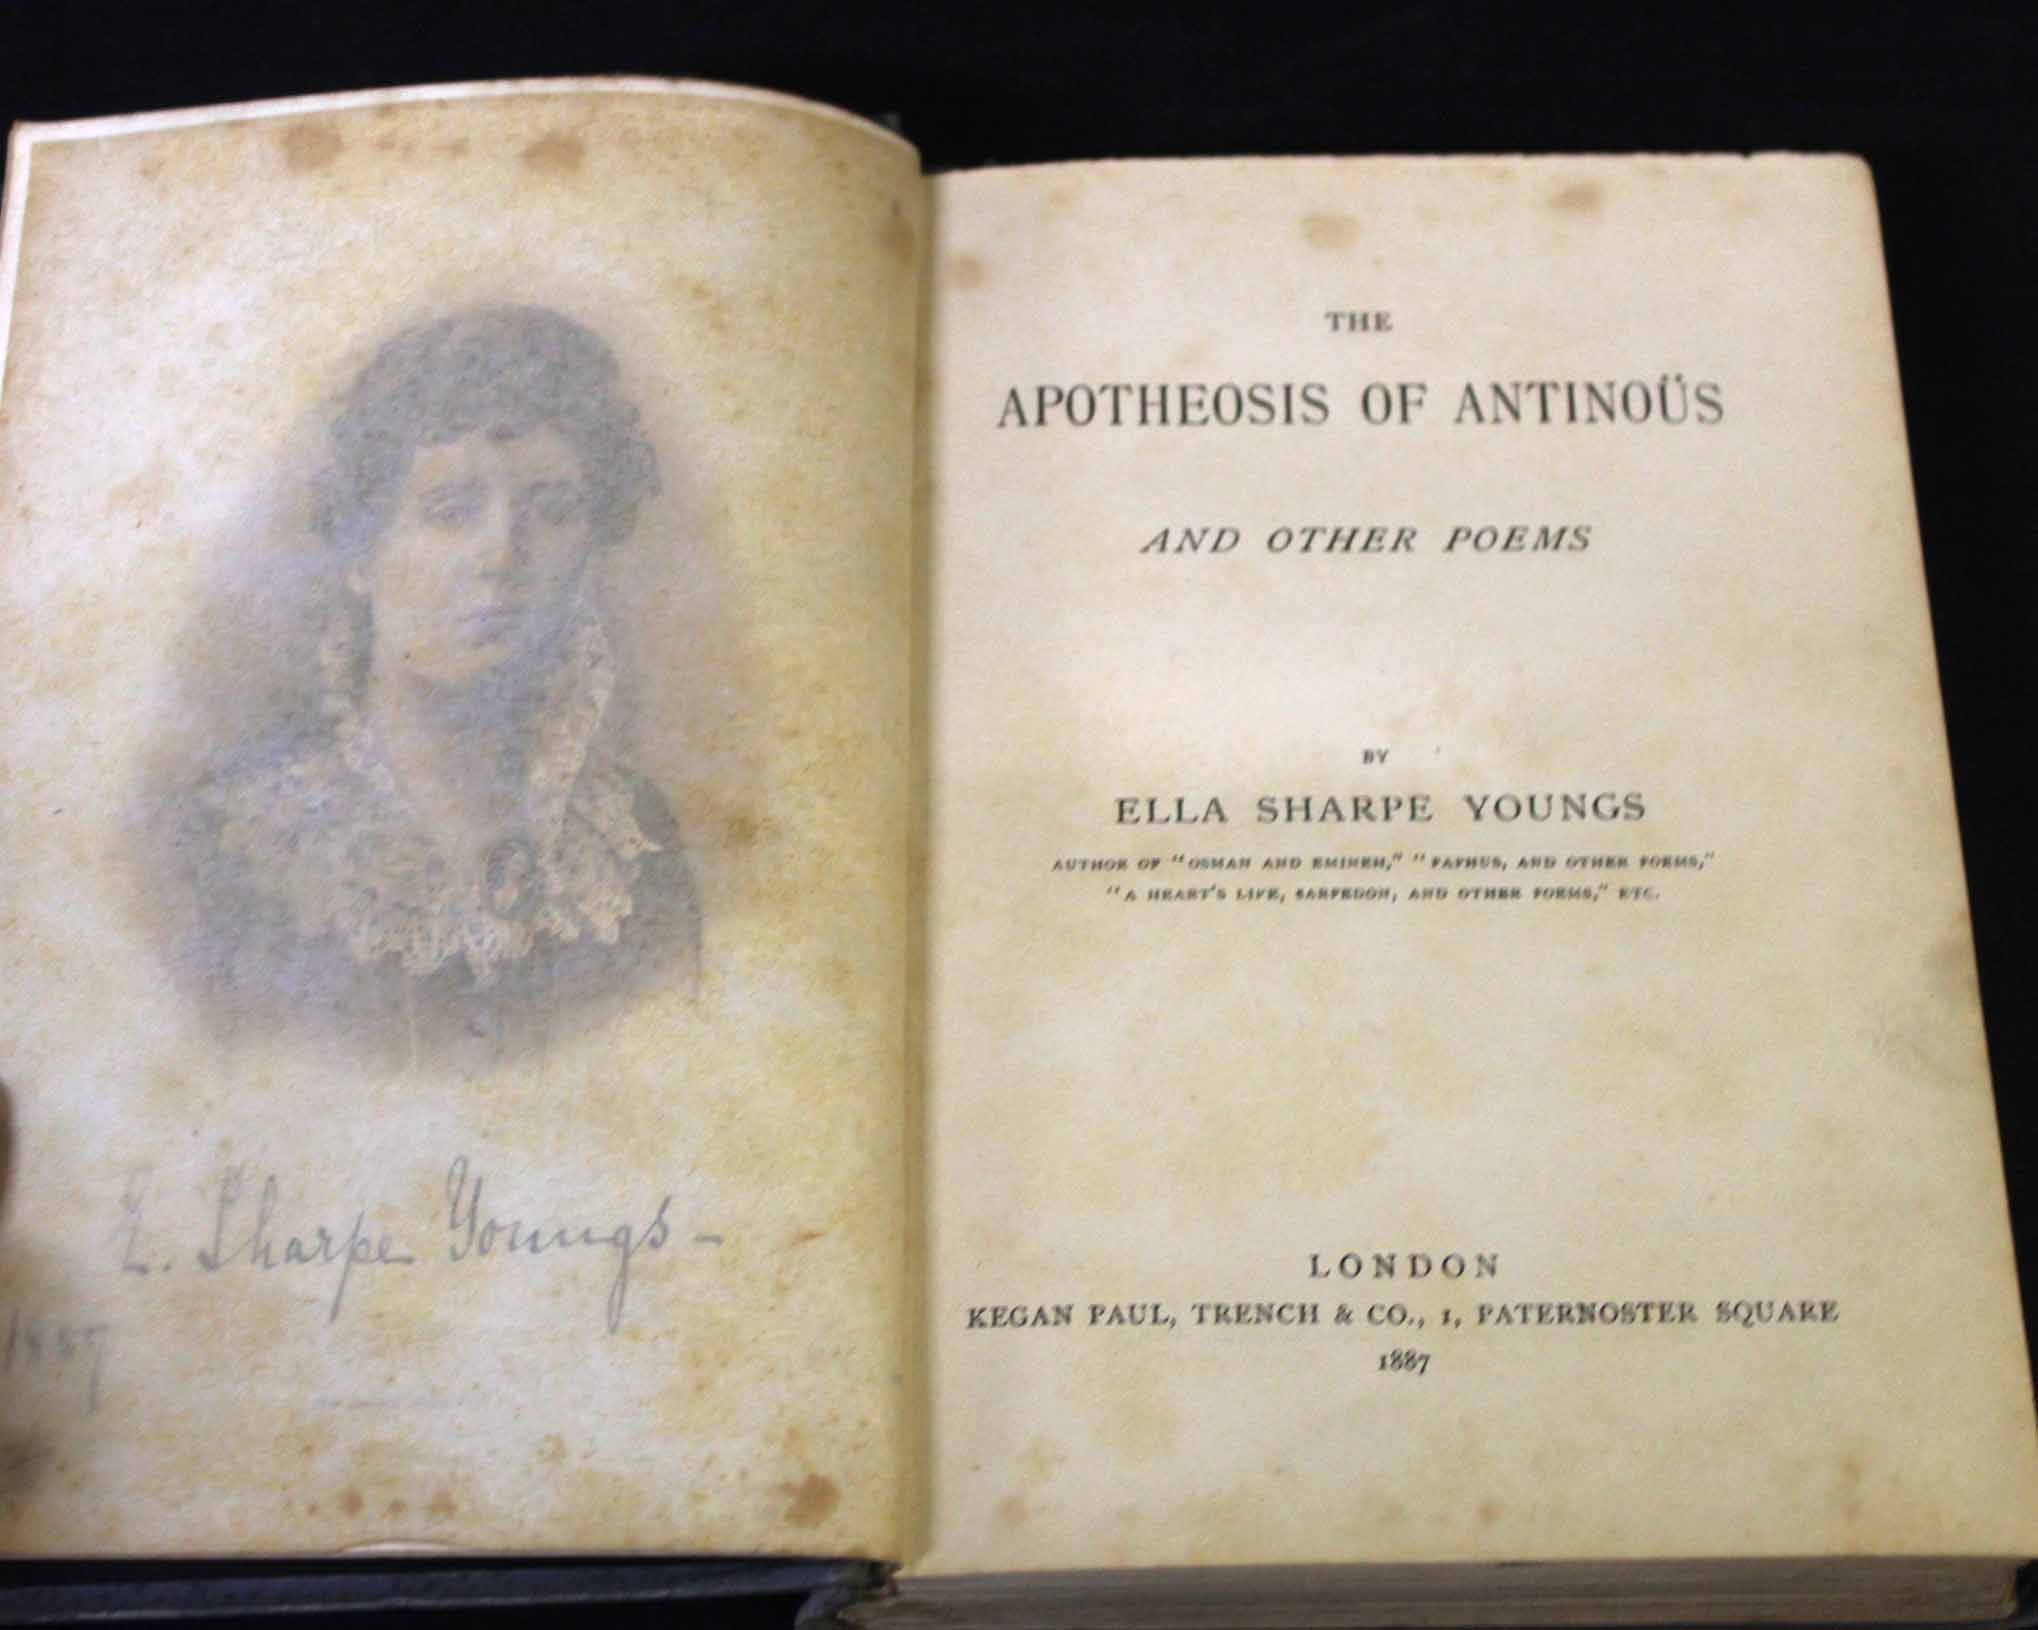 ELLA SHARPE YOUNGS: THE APOTHEOSIS OF ANTINOUS AND OTHER POEMS, London, Keegan Paul Trench & Co,